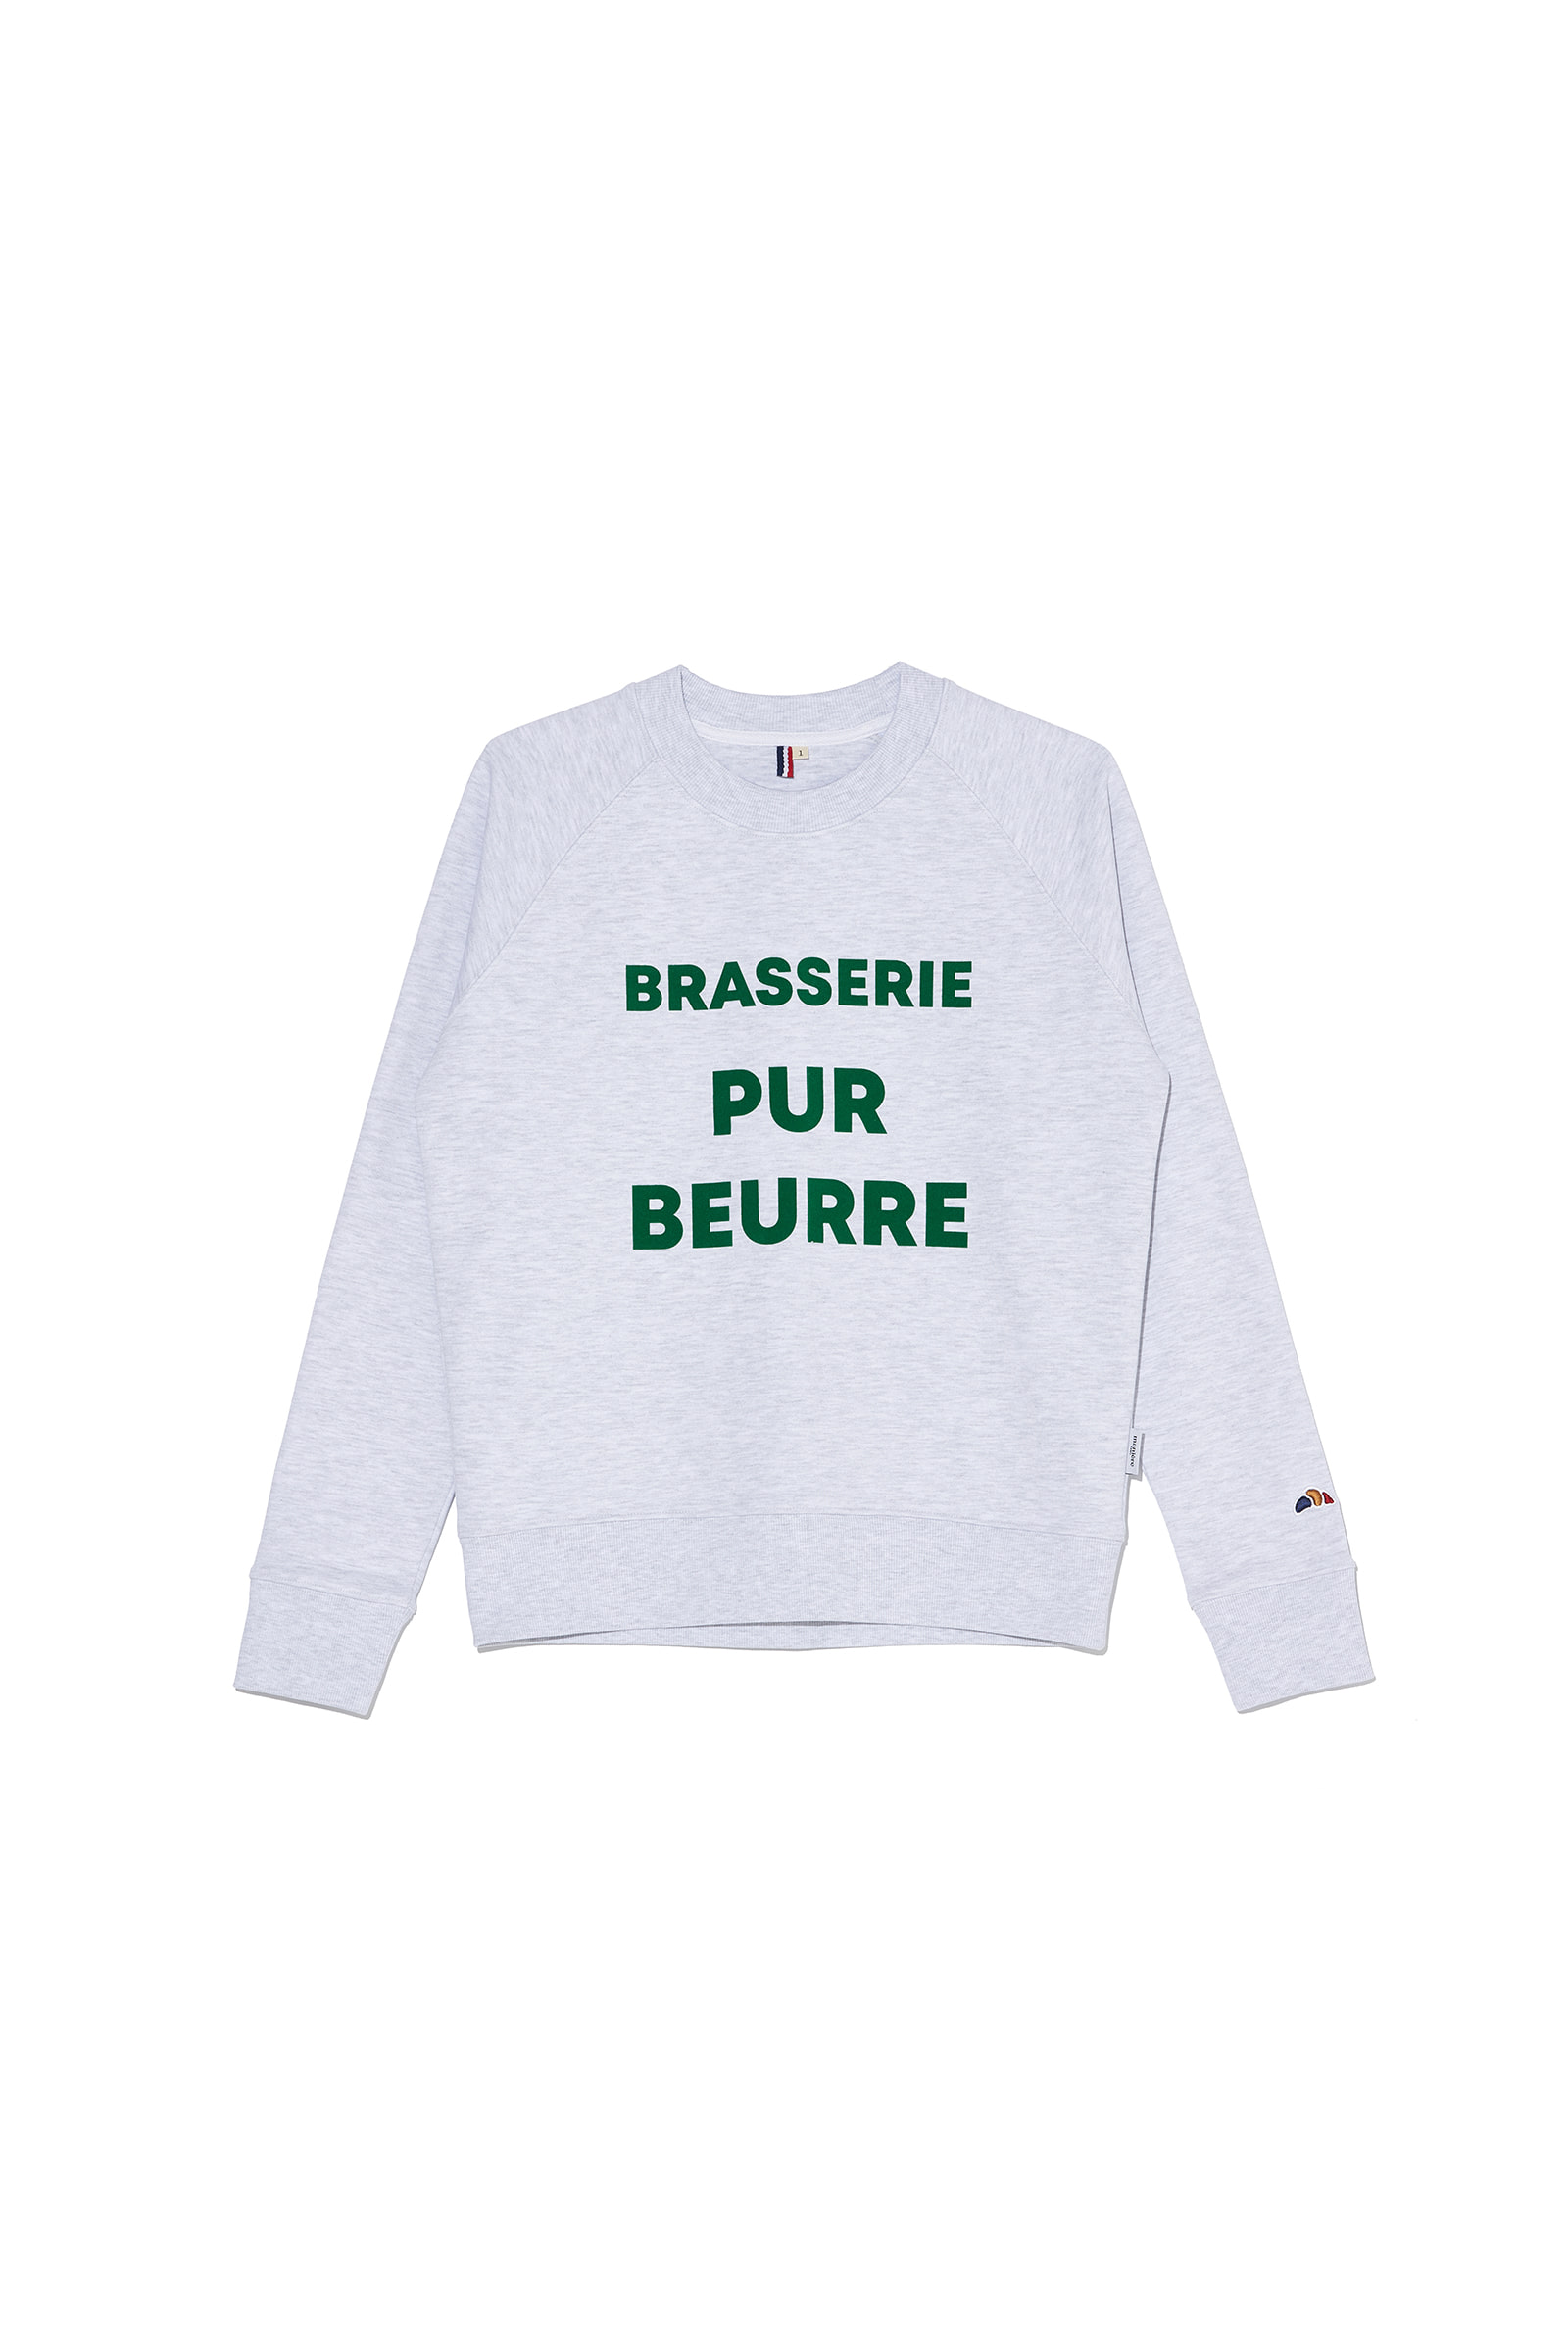 ep.6 BRASSERIE PUR BEURRE lettering sweatshirts (Cool gray)